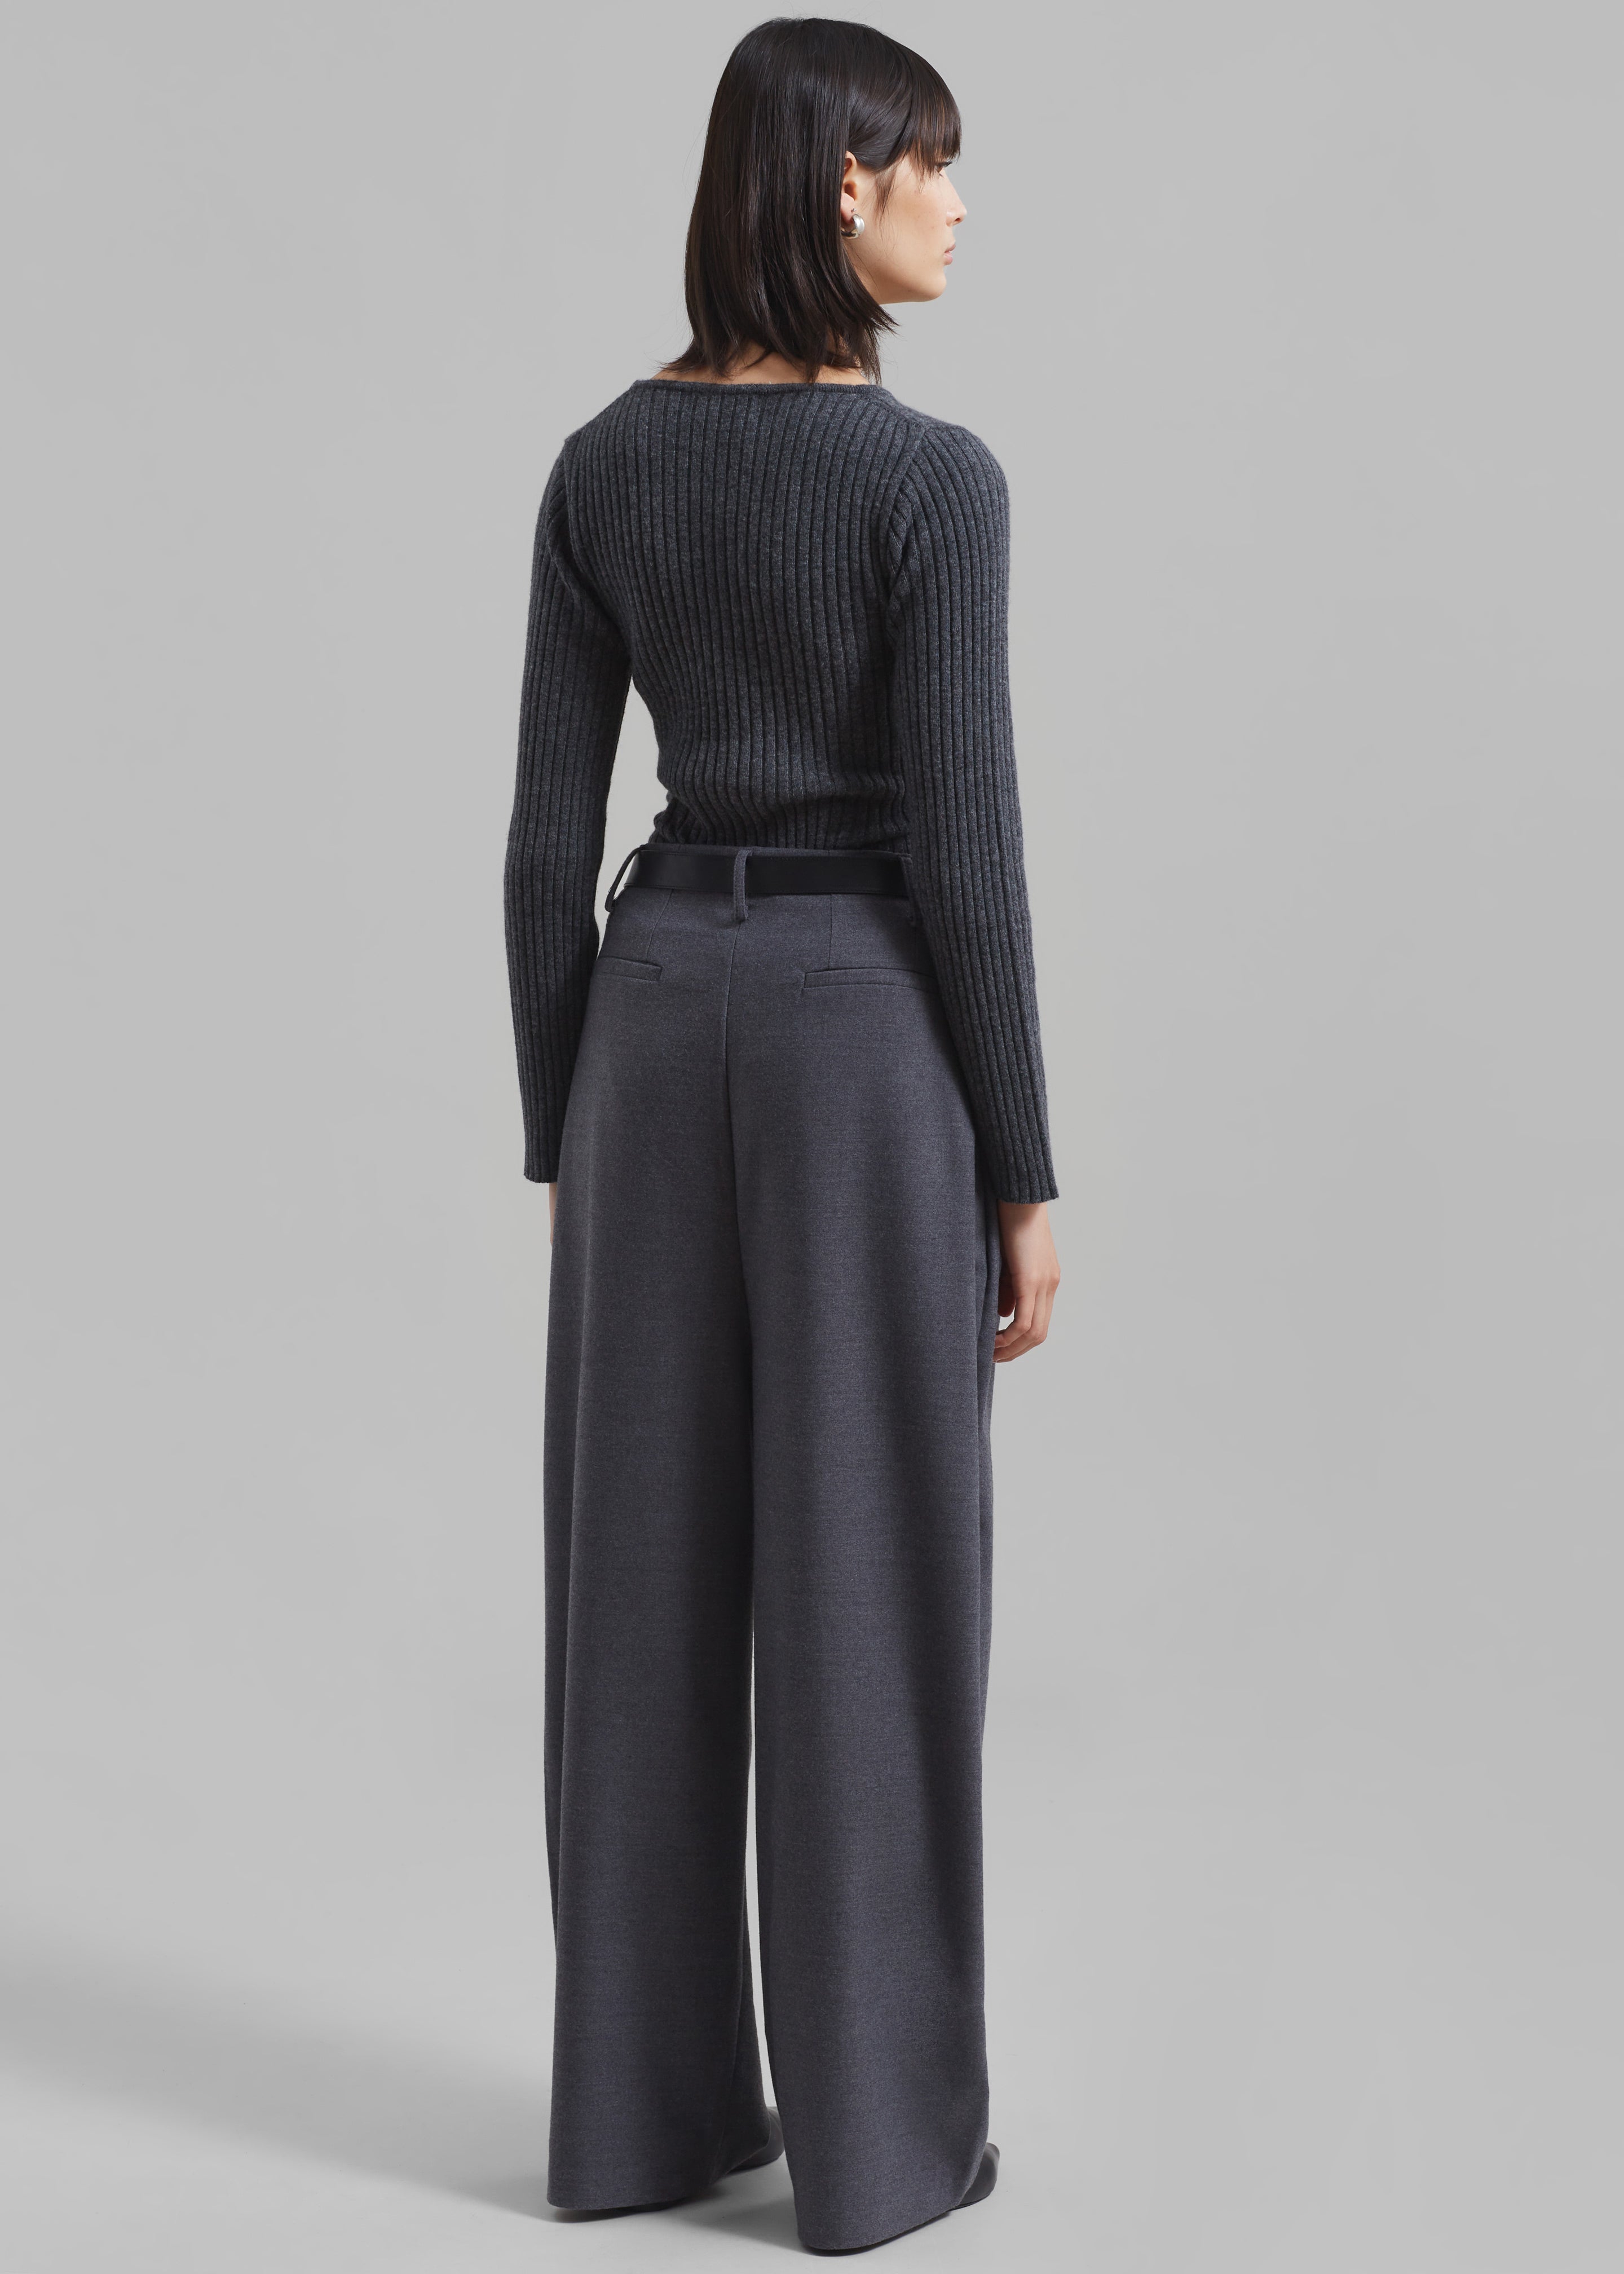 Cora Ribbed Sweater - Charcoal - 7